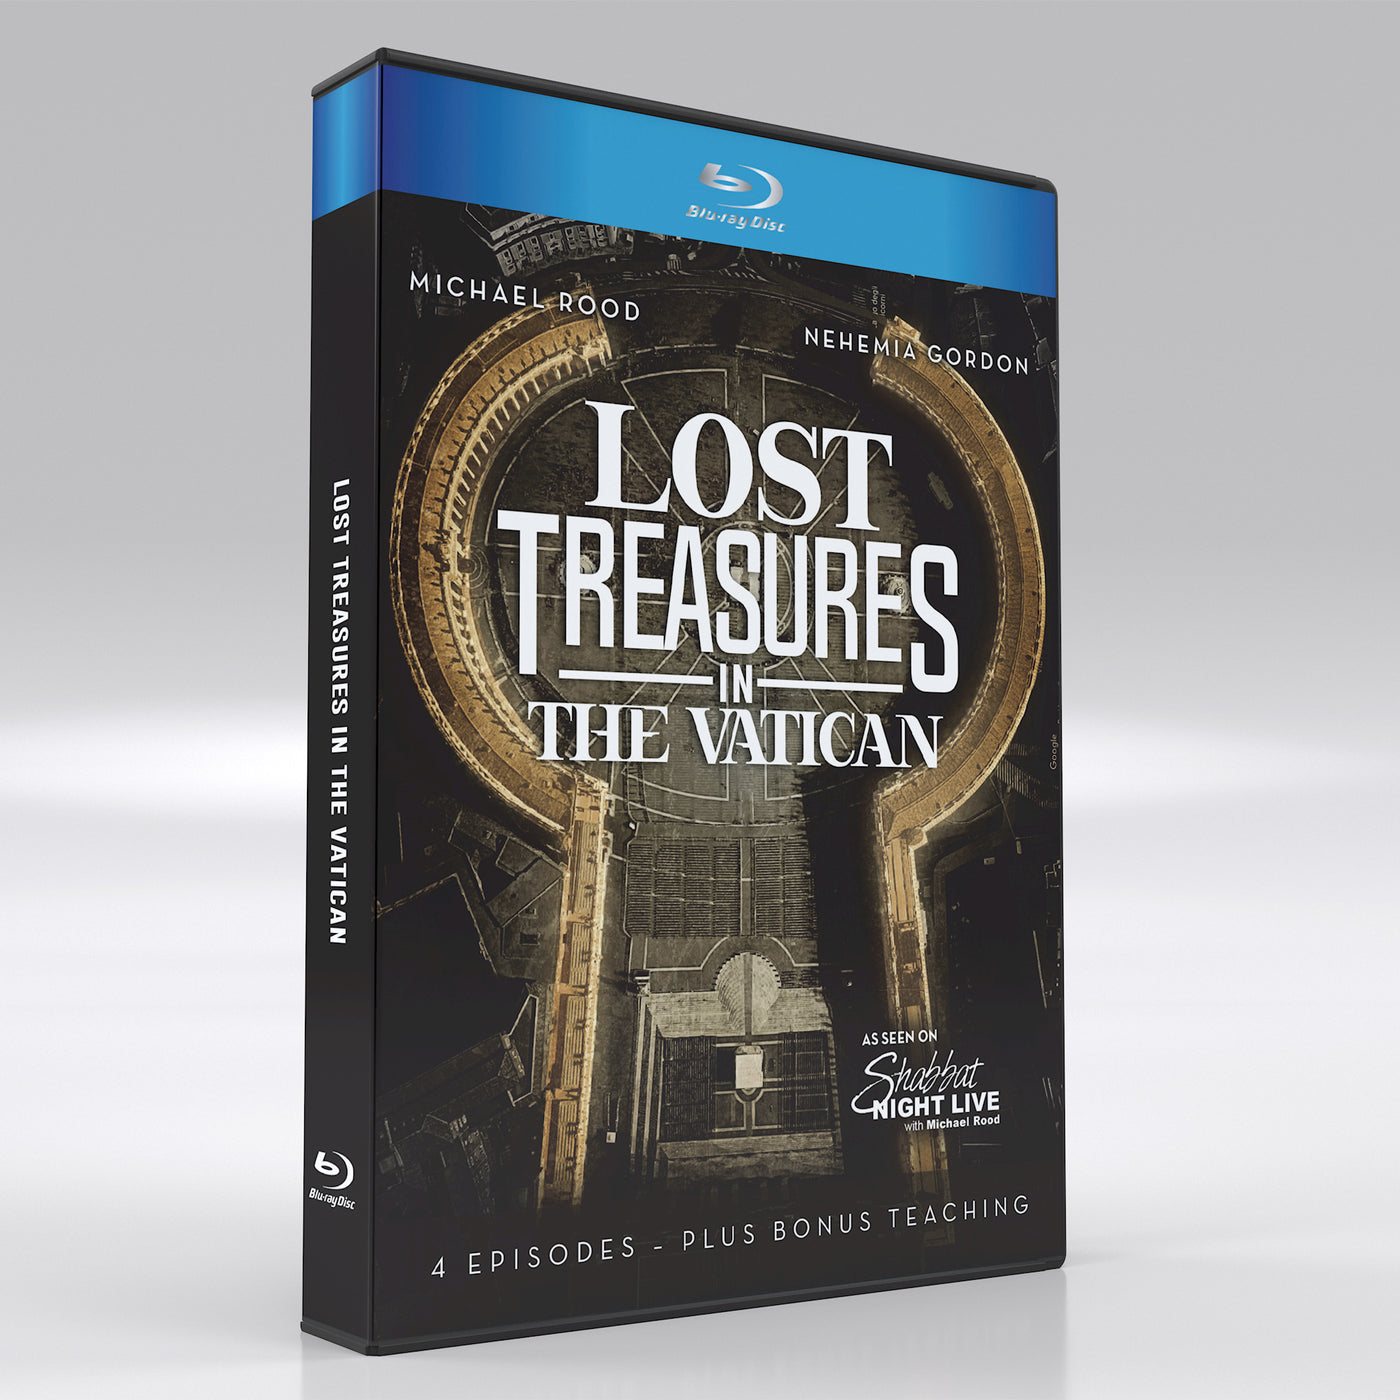 Lost Treasures in The Vatican with Michael Rood and Nehemia Gordon